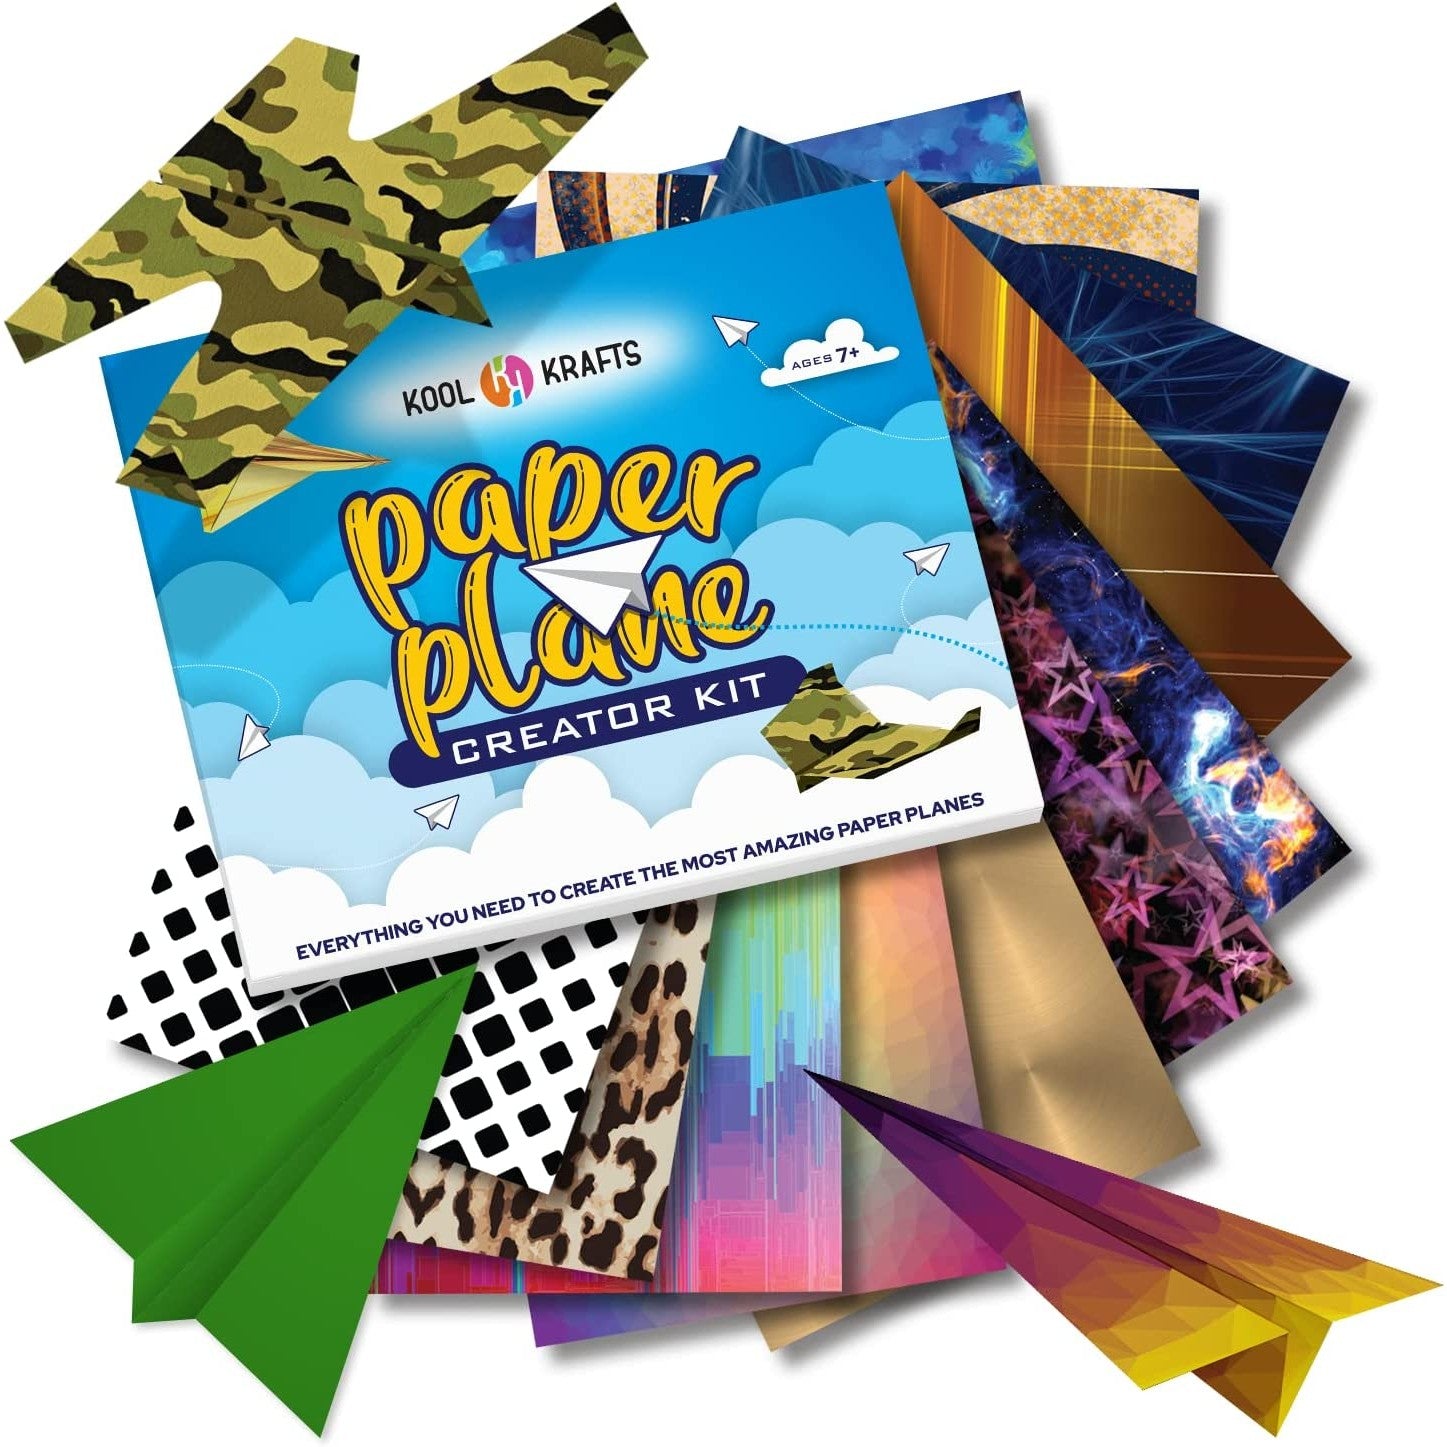 All the colorful contents for a paper plane creator kit.